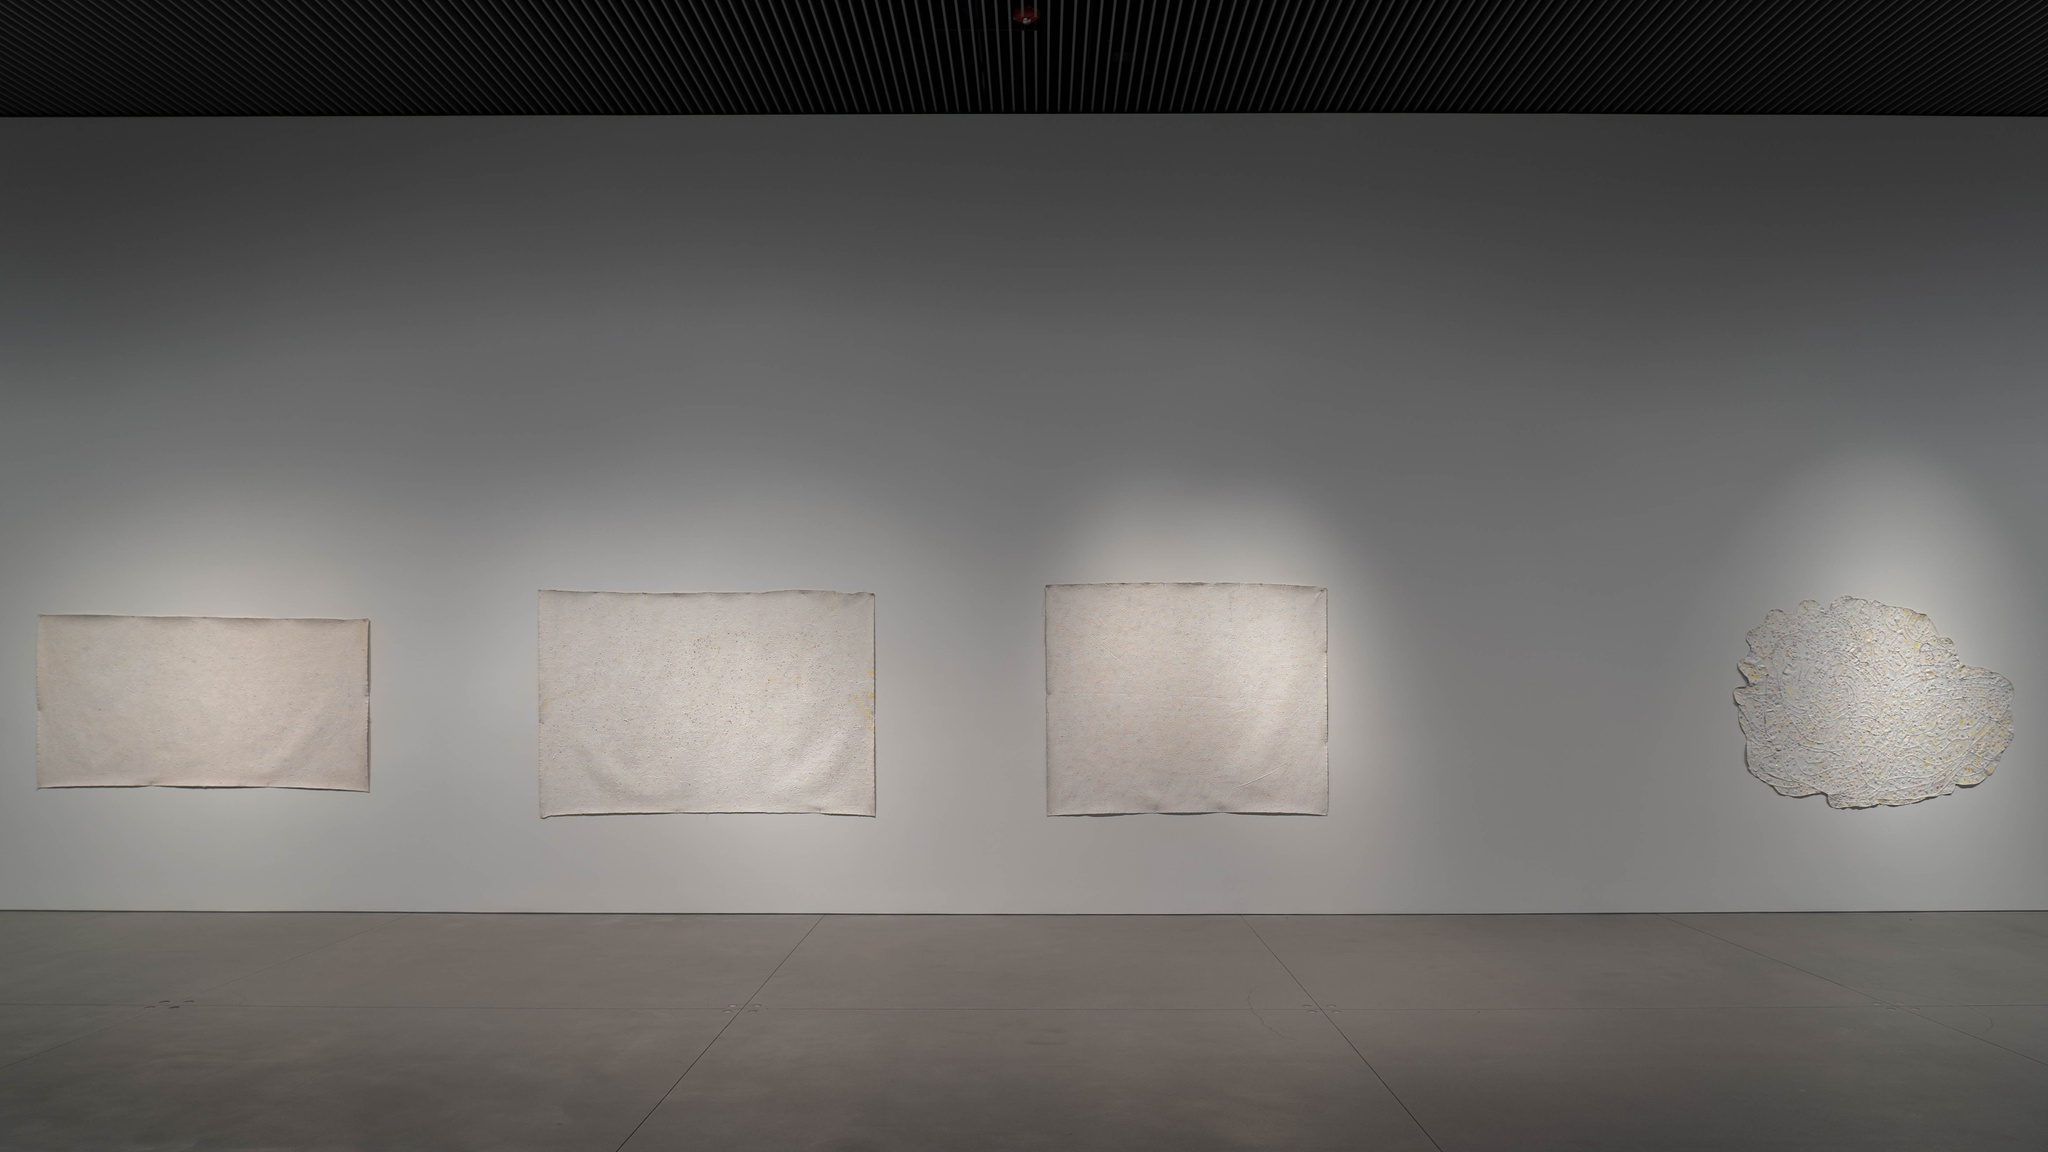 An installation view of abstract paintings in the exhibition Howardena Pindell: Rope/Fire/Water. Three rectangular off-white canvases from the 1970s hang in a row beside a curvilinear abstract canvas.